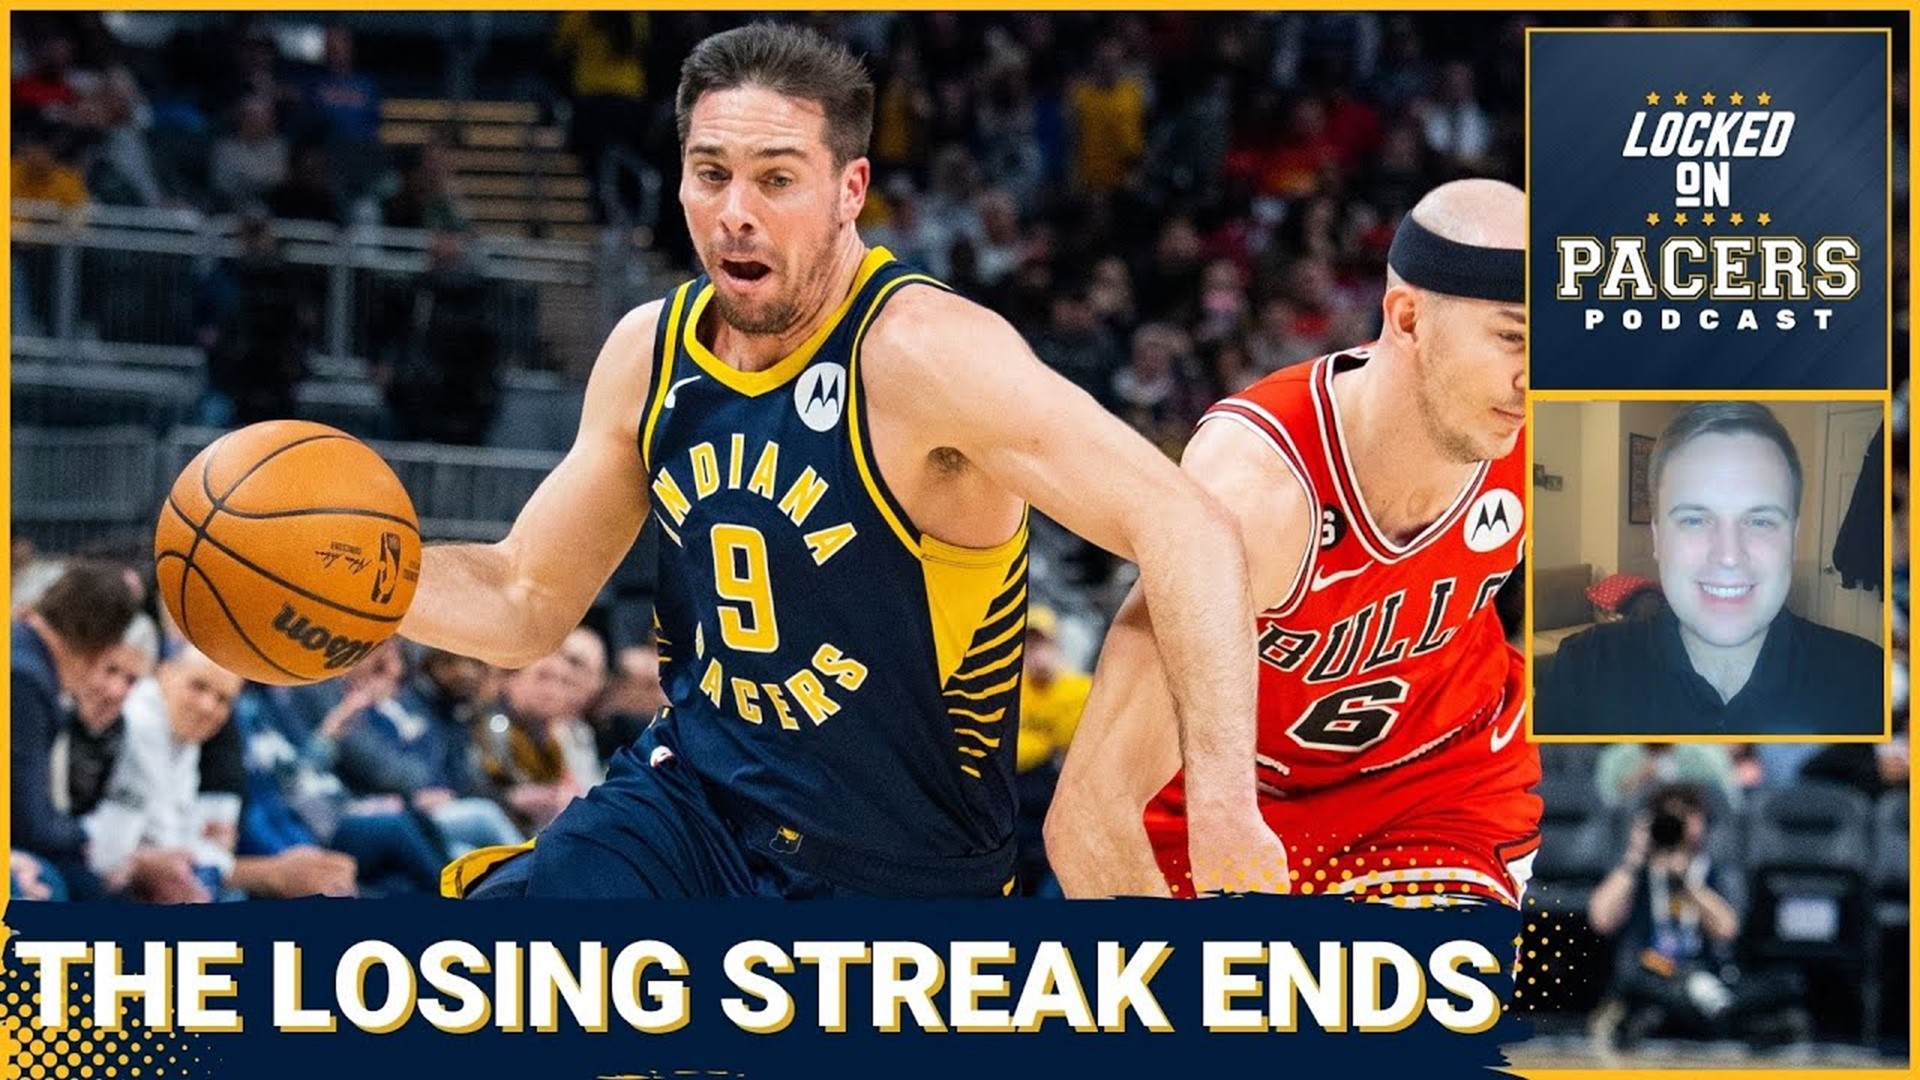 Indiana Pacers snap losing streak with 21-point comeback win over Chicago Bulls